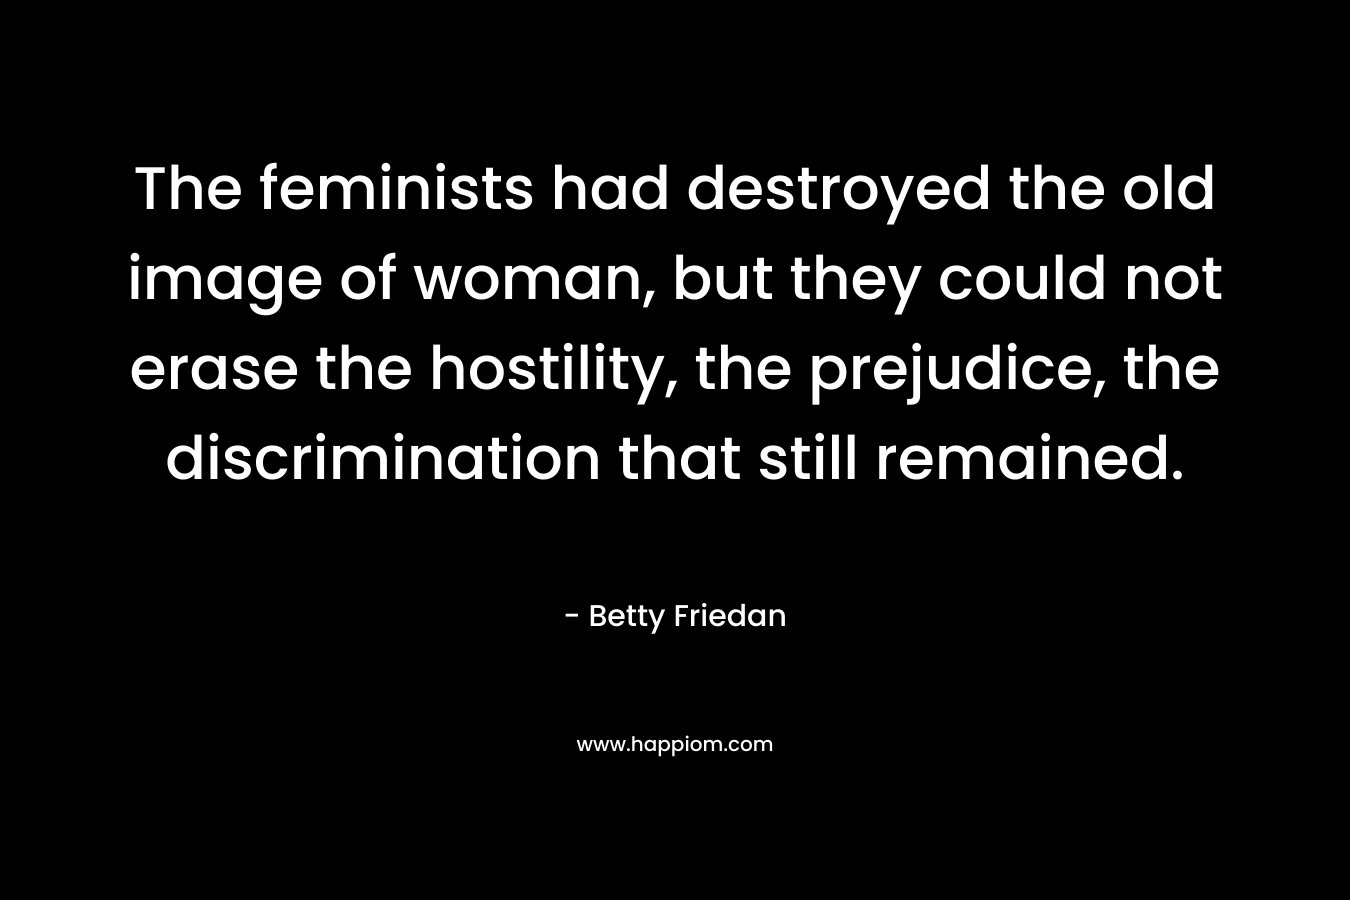 The feminists had destroyed the old image of woman, but they could not erase the hostility, the prejudice, the discrimination that still remained.